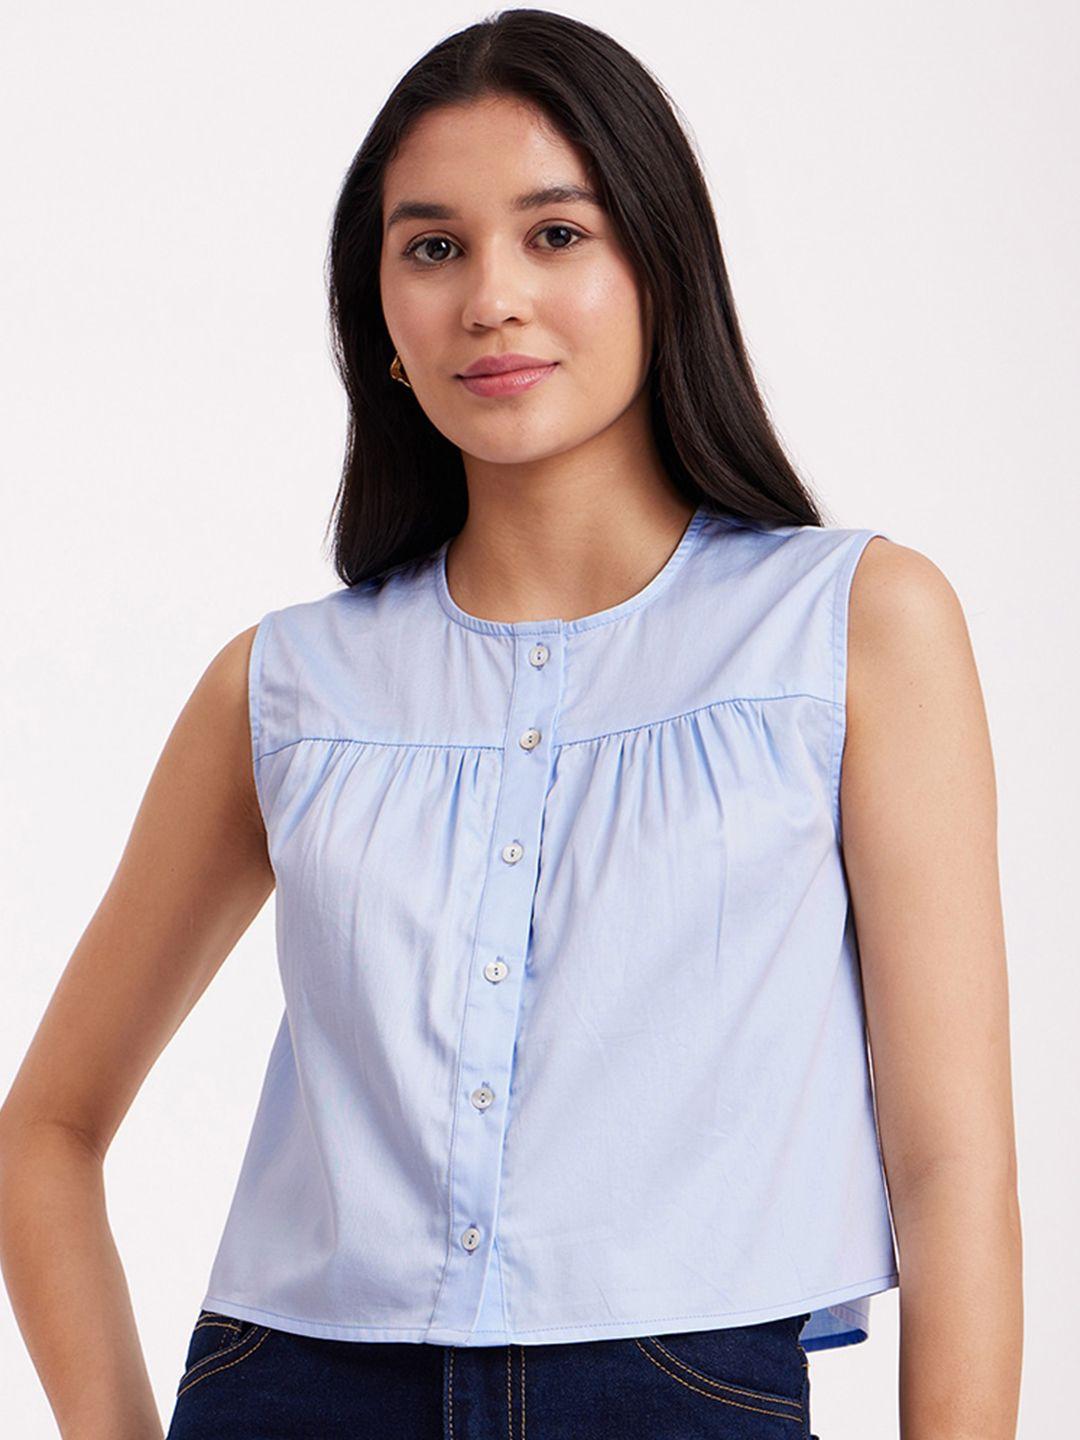 fablestreet cotton top